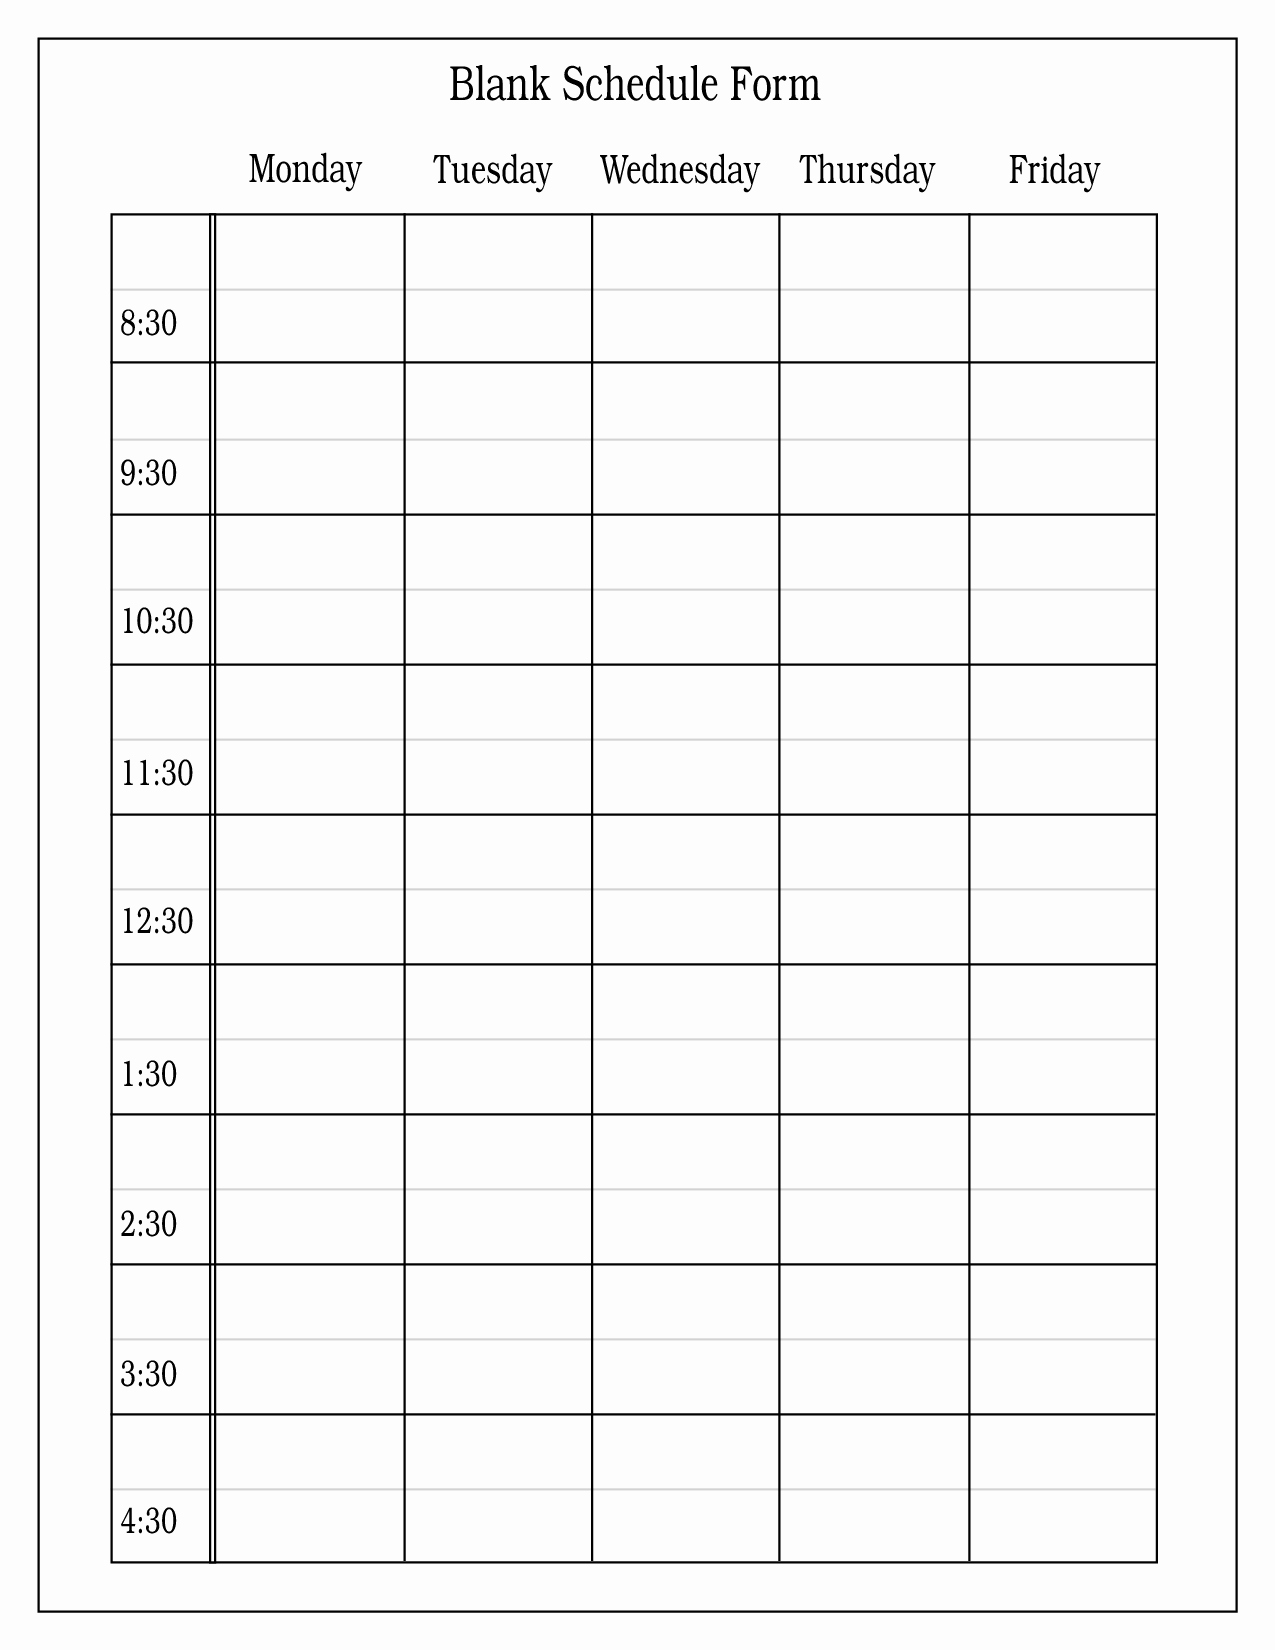 Conference Room Scheduler Template Inspirational Conference Room Scheduling Template Baskanai